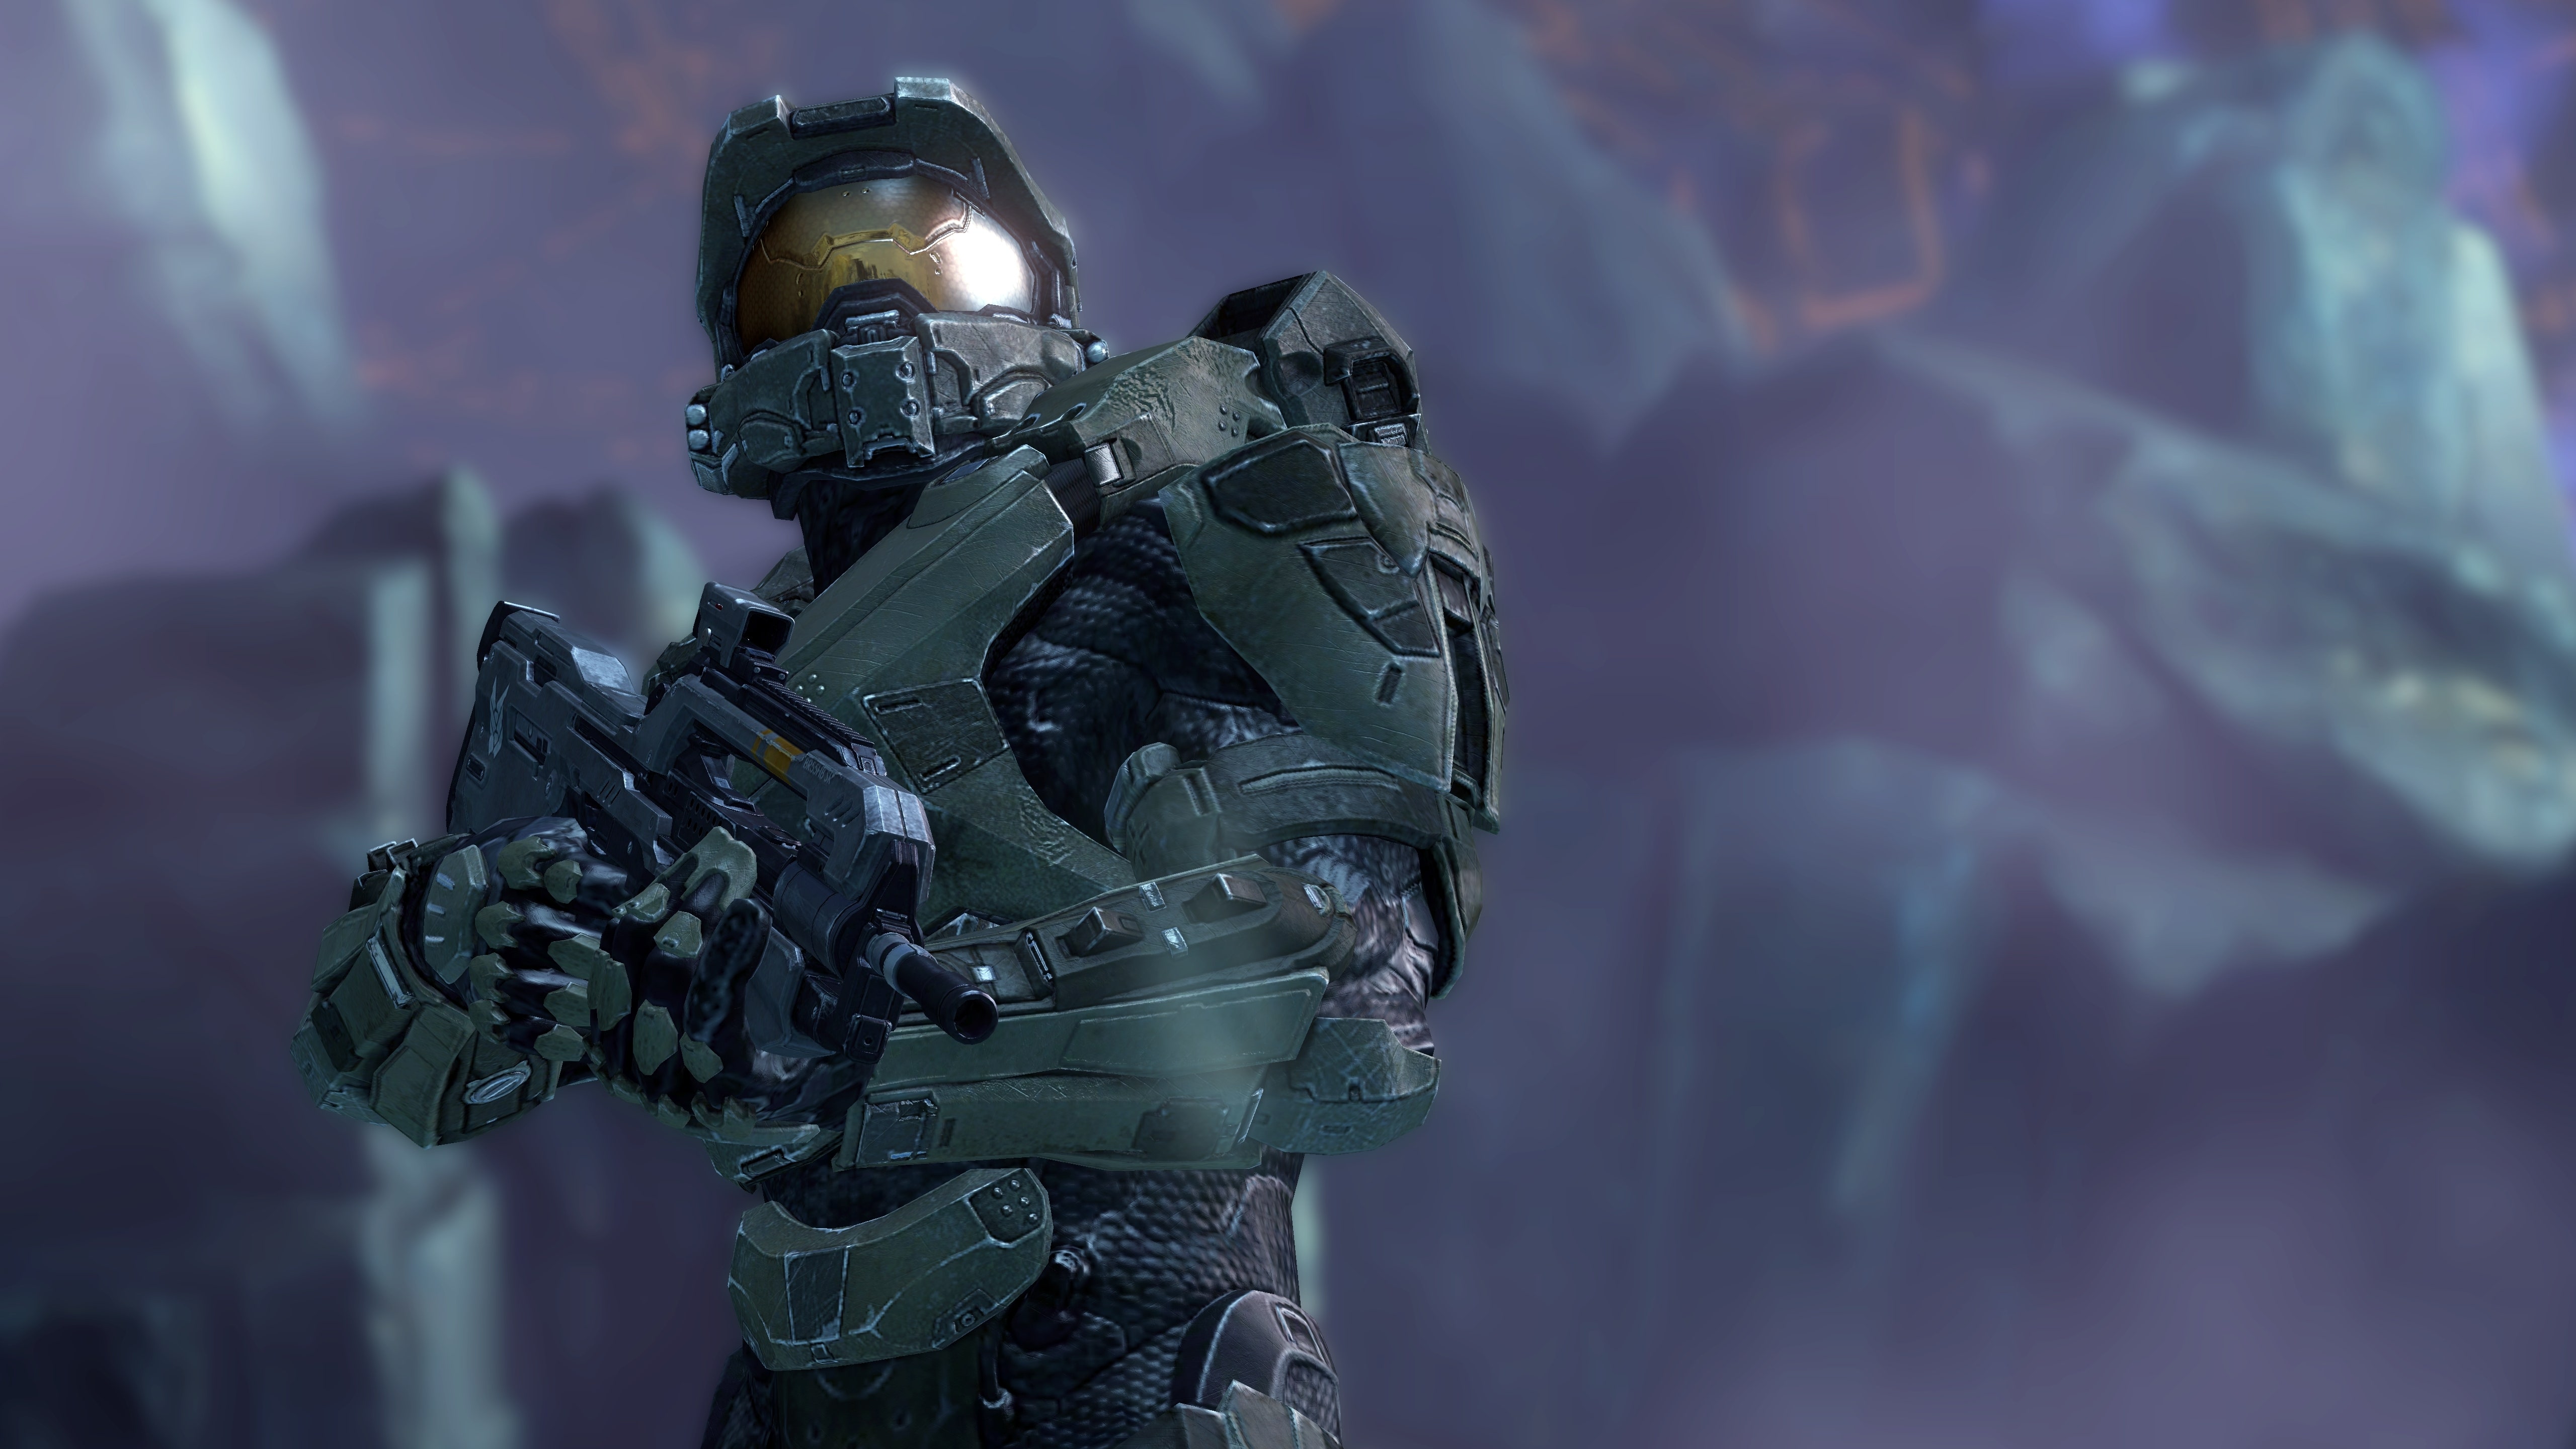 Why the Halo Movie Failed to Launch